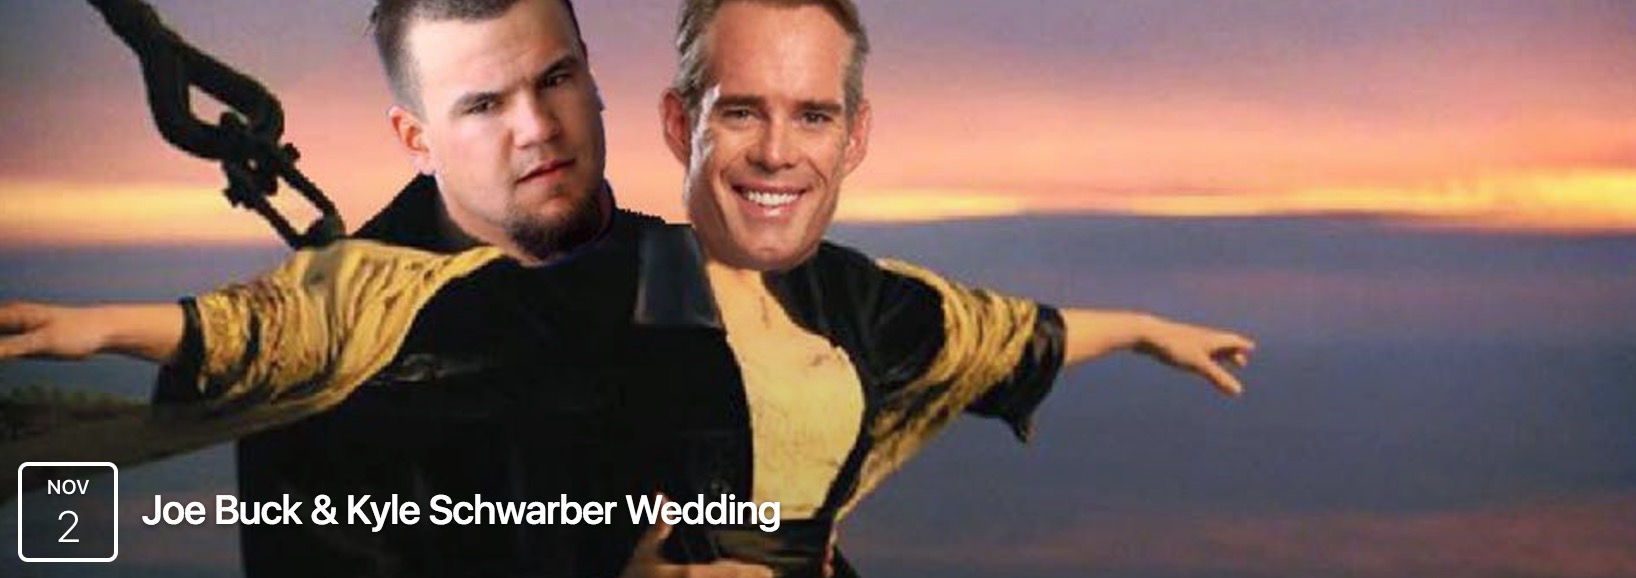 How one fan turned Cleveland's complaints about Joe Buck into an elaborate,  fake wedding